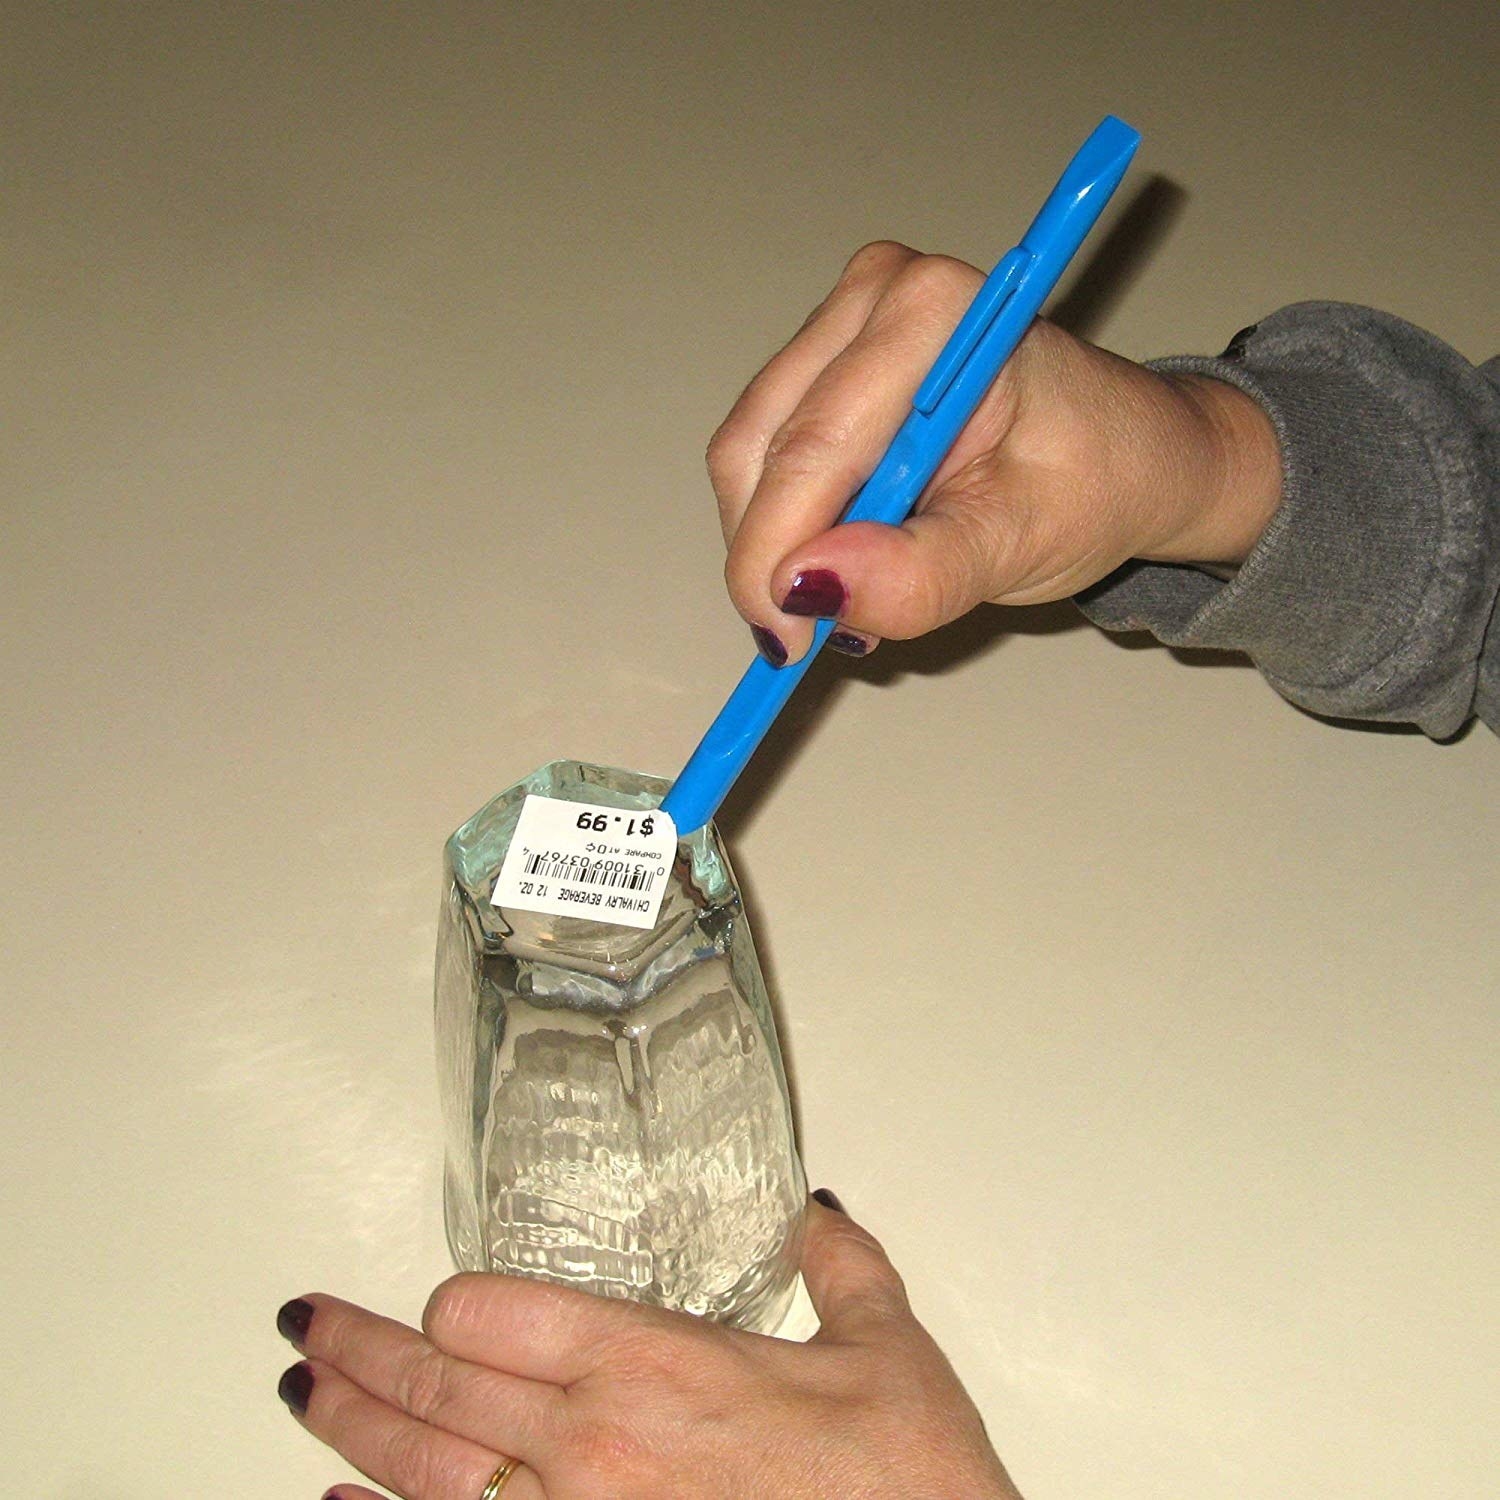 A hand using the scraper to remove a sticker from a glass